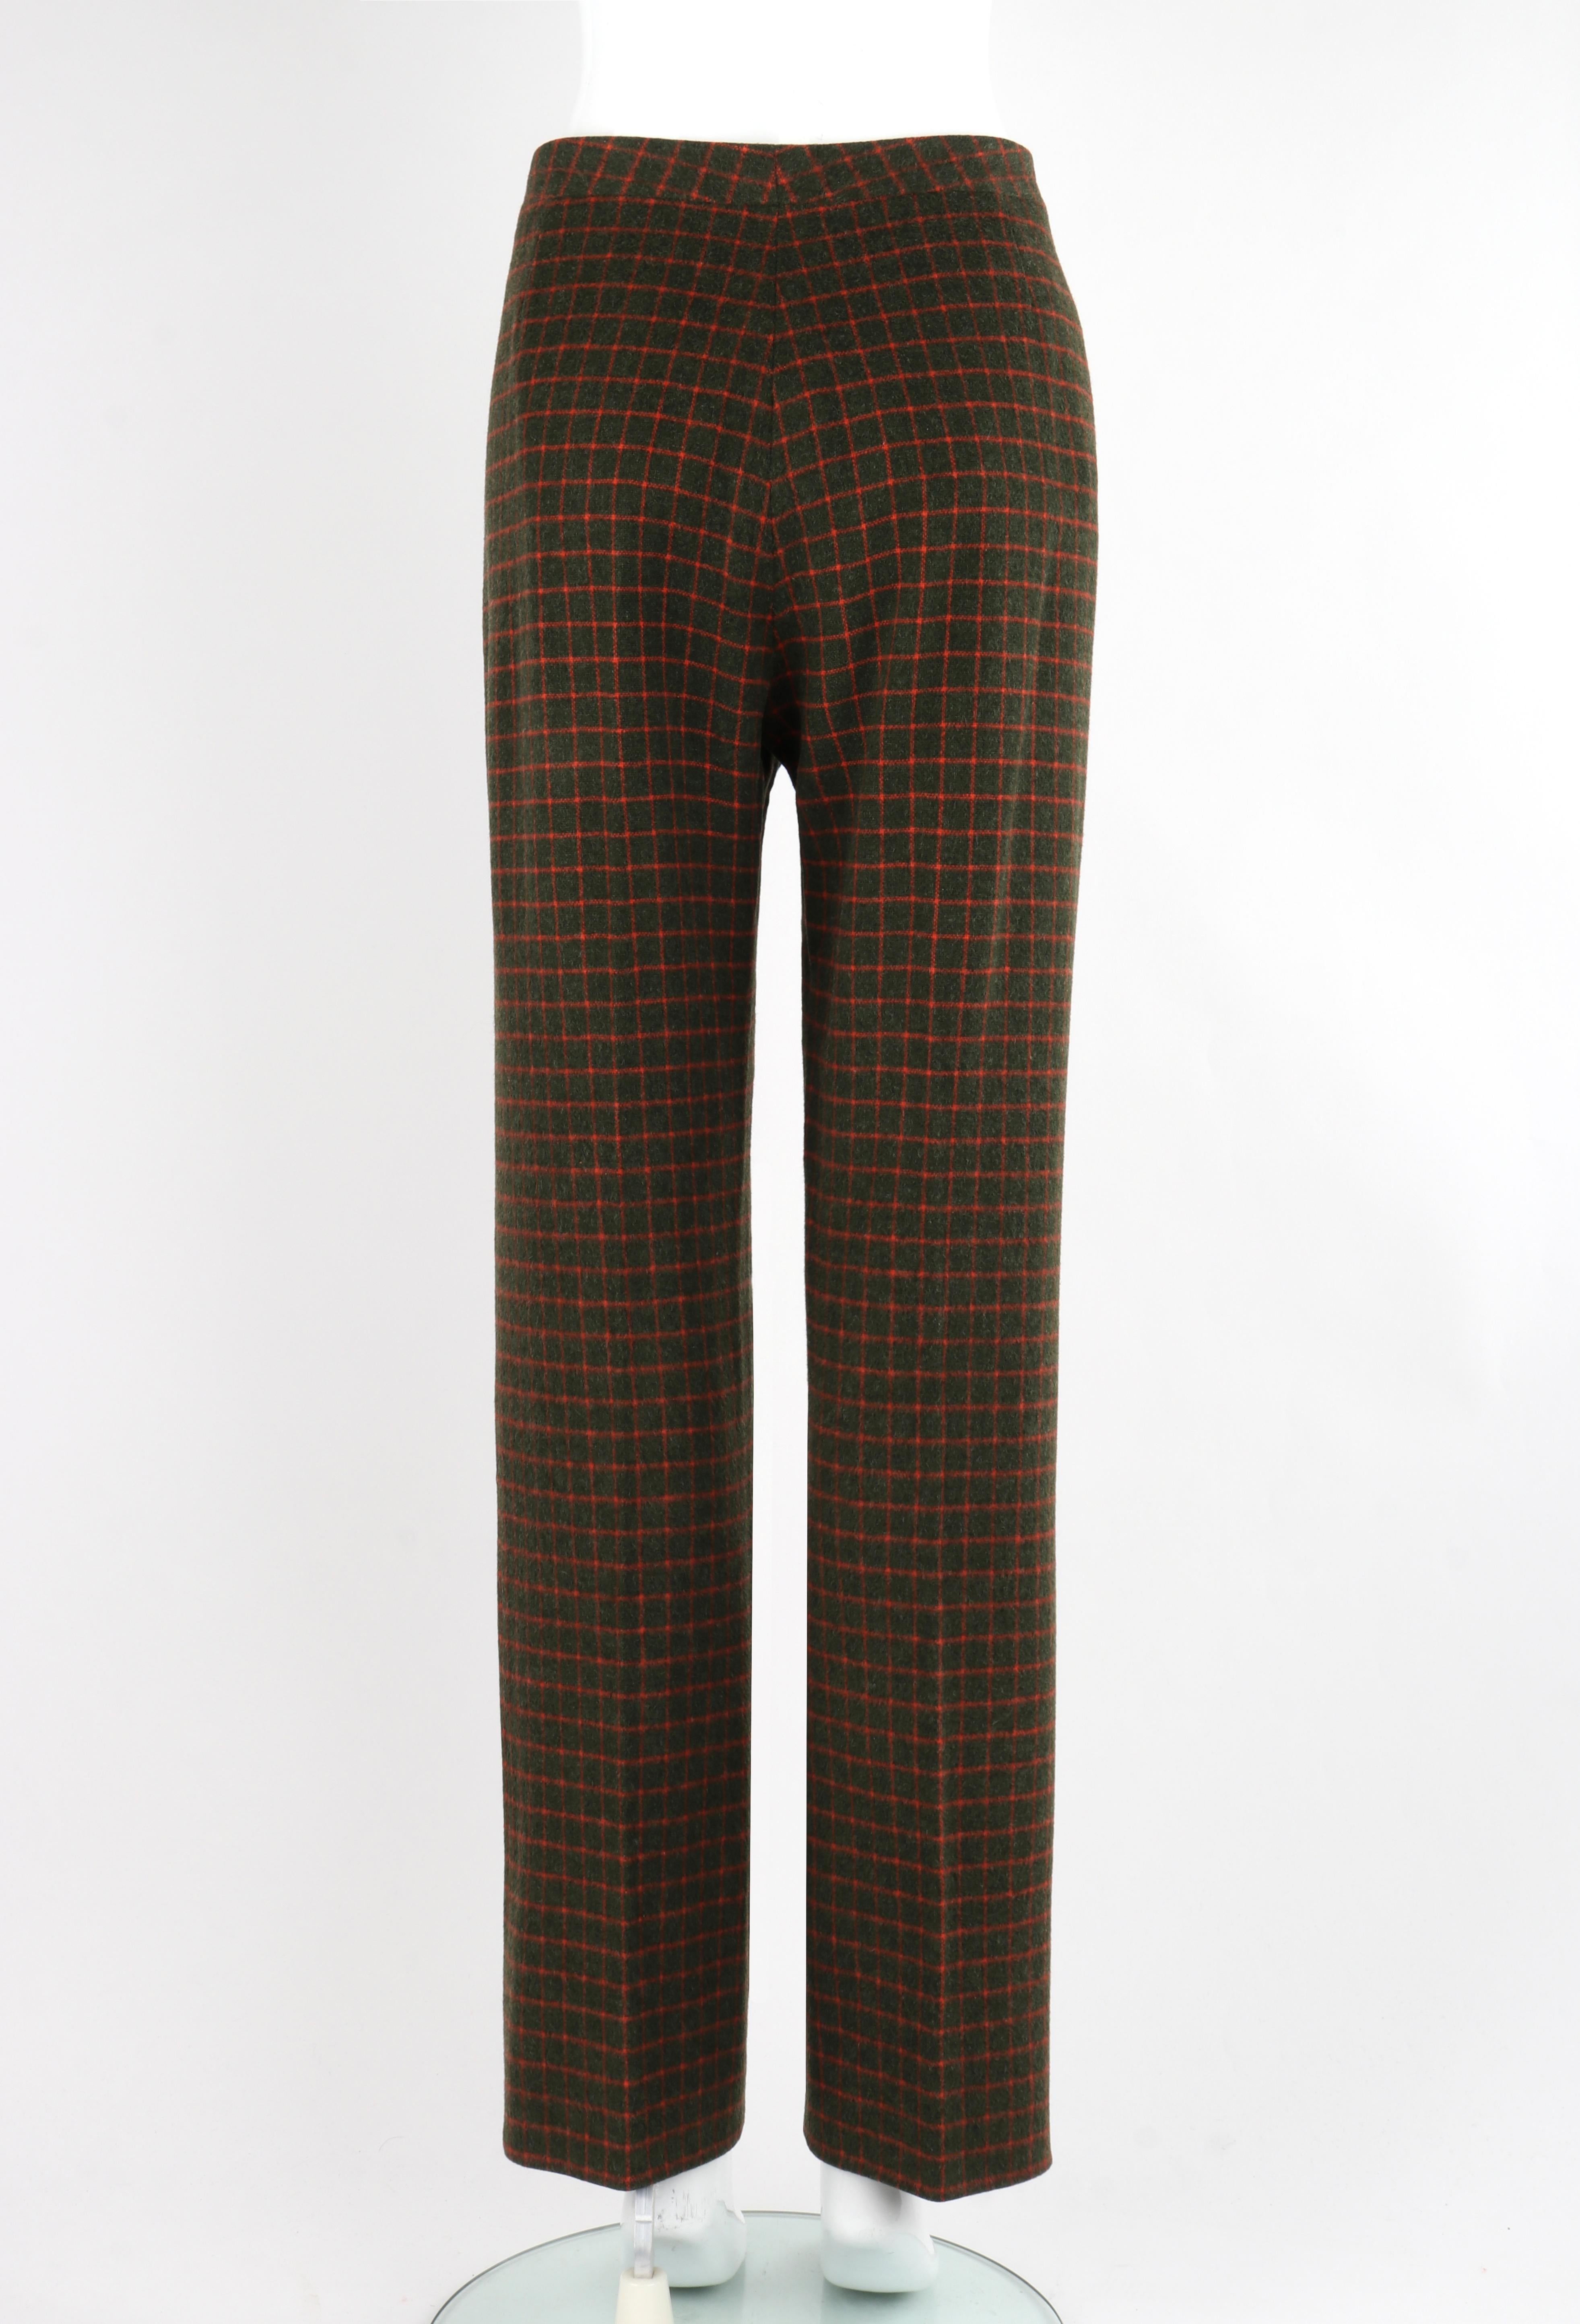 CELINE c.1990's Wool Green Red Check Pattern High Waist Tapered Trouser Pants 1